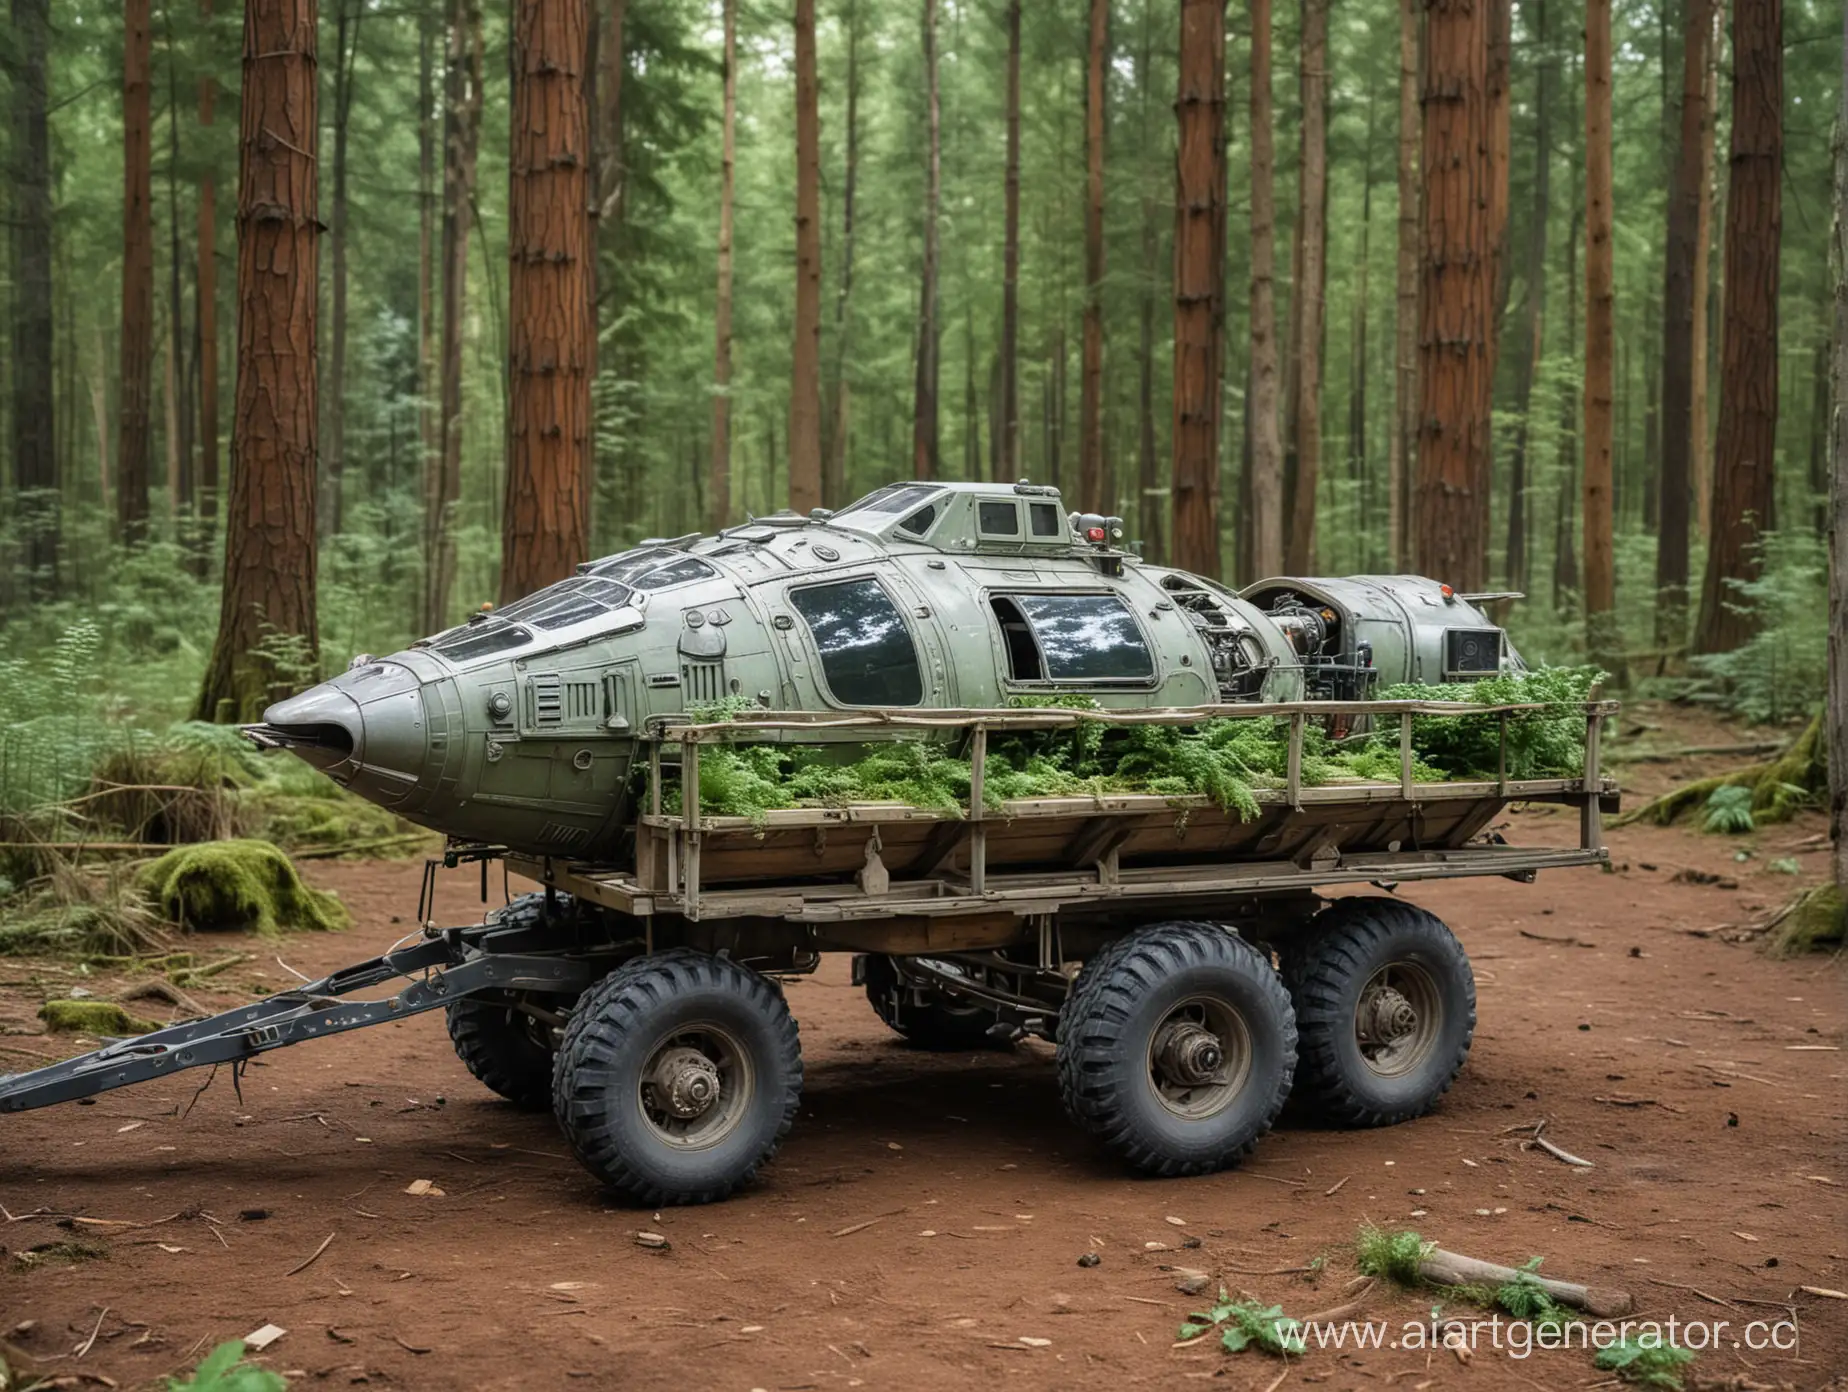 Spaceship-Parts-in-Wooden-Cart-Amidst-Green-Forest